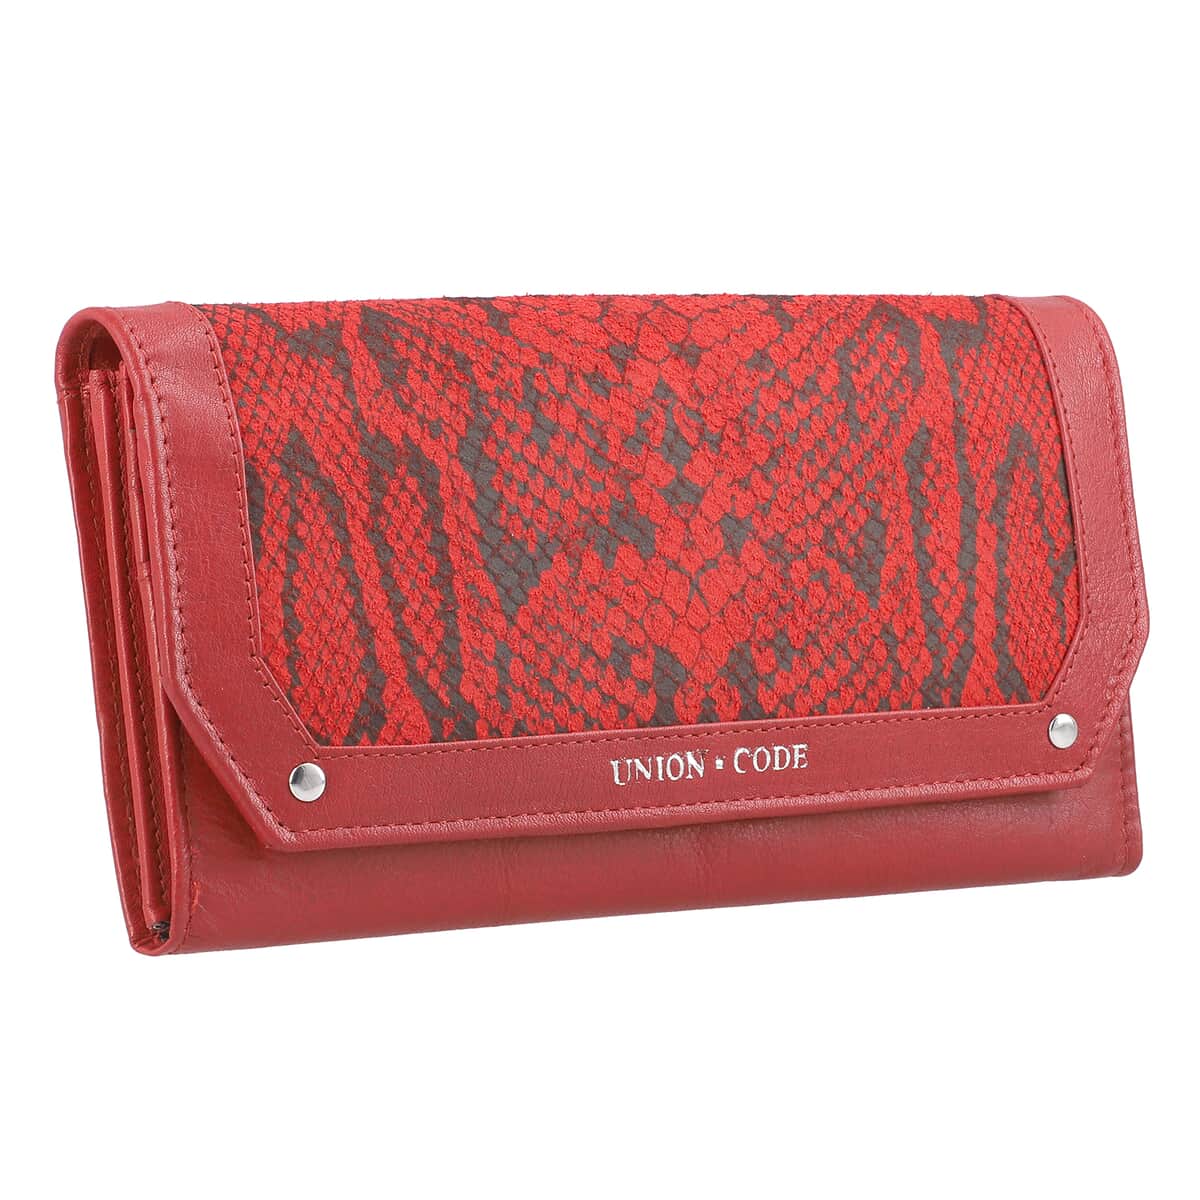 Union Code Red Genuine Leather RFID Women's Wallet image number 5